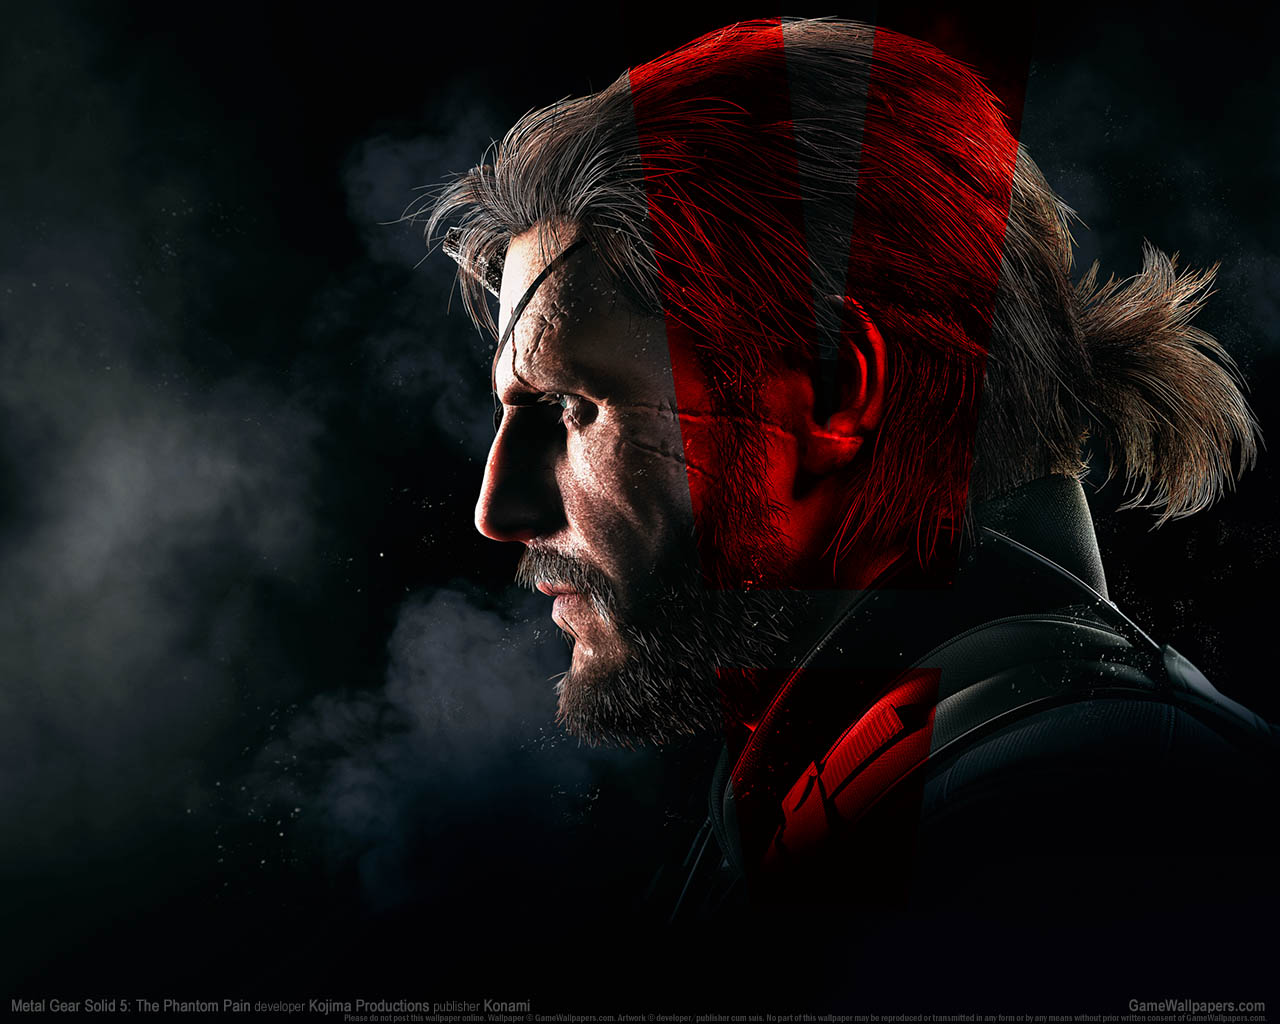 Metal Gear Solid 5: The Phantom Pain achtergrond 01 1280x1024